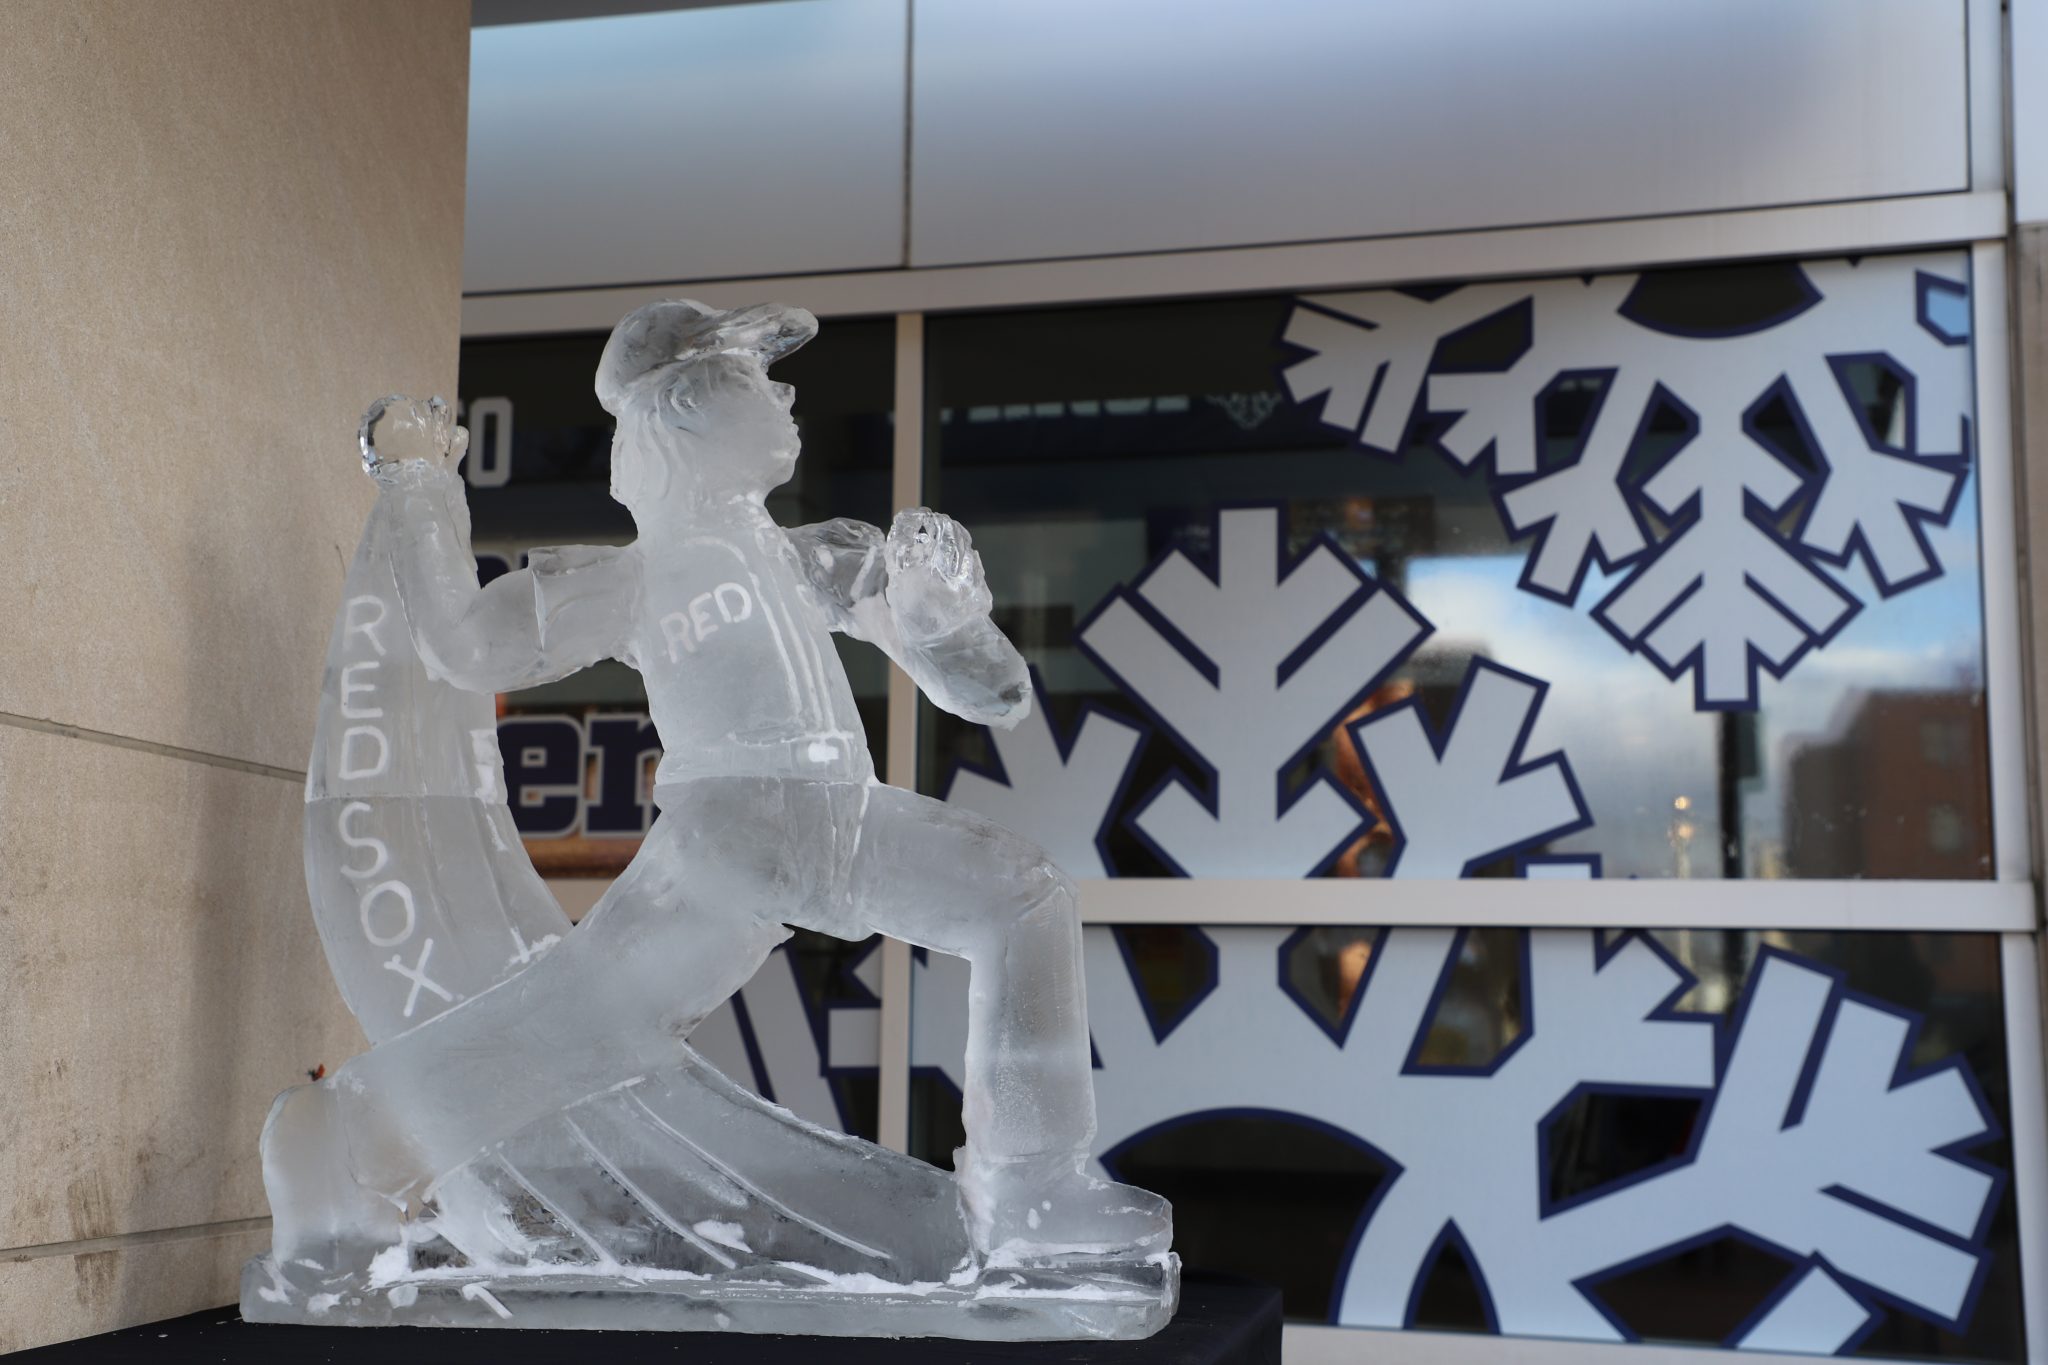 Stopping by our games? Make sure you check out our ice sculpture in front  of the MassMutual Center, brought to you by the Springfield BID! 🧊